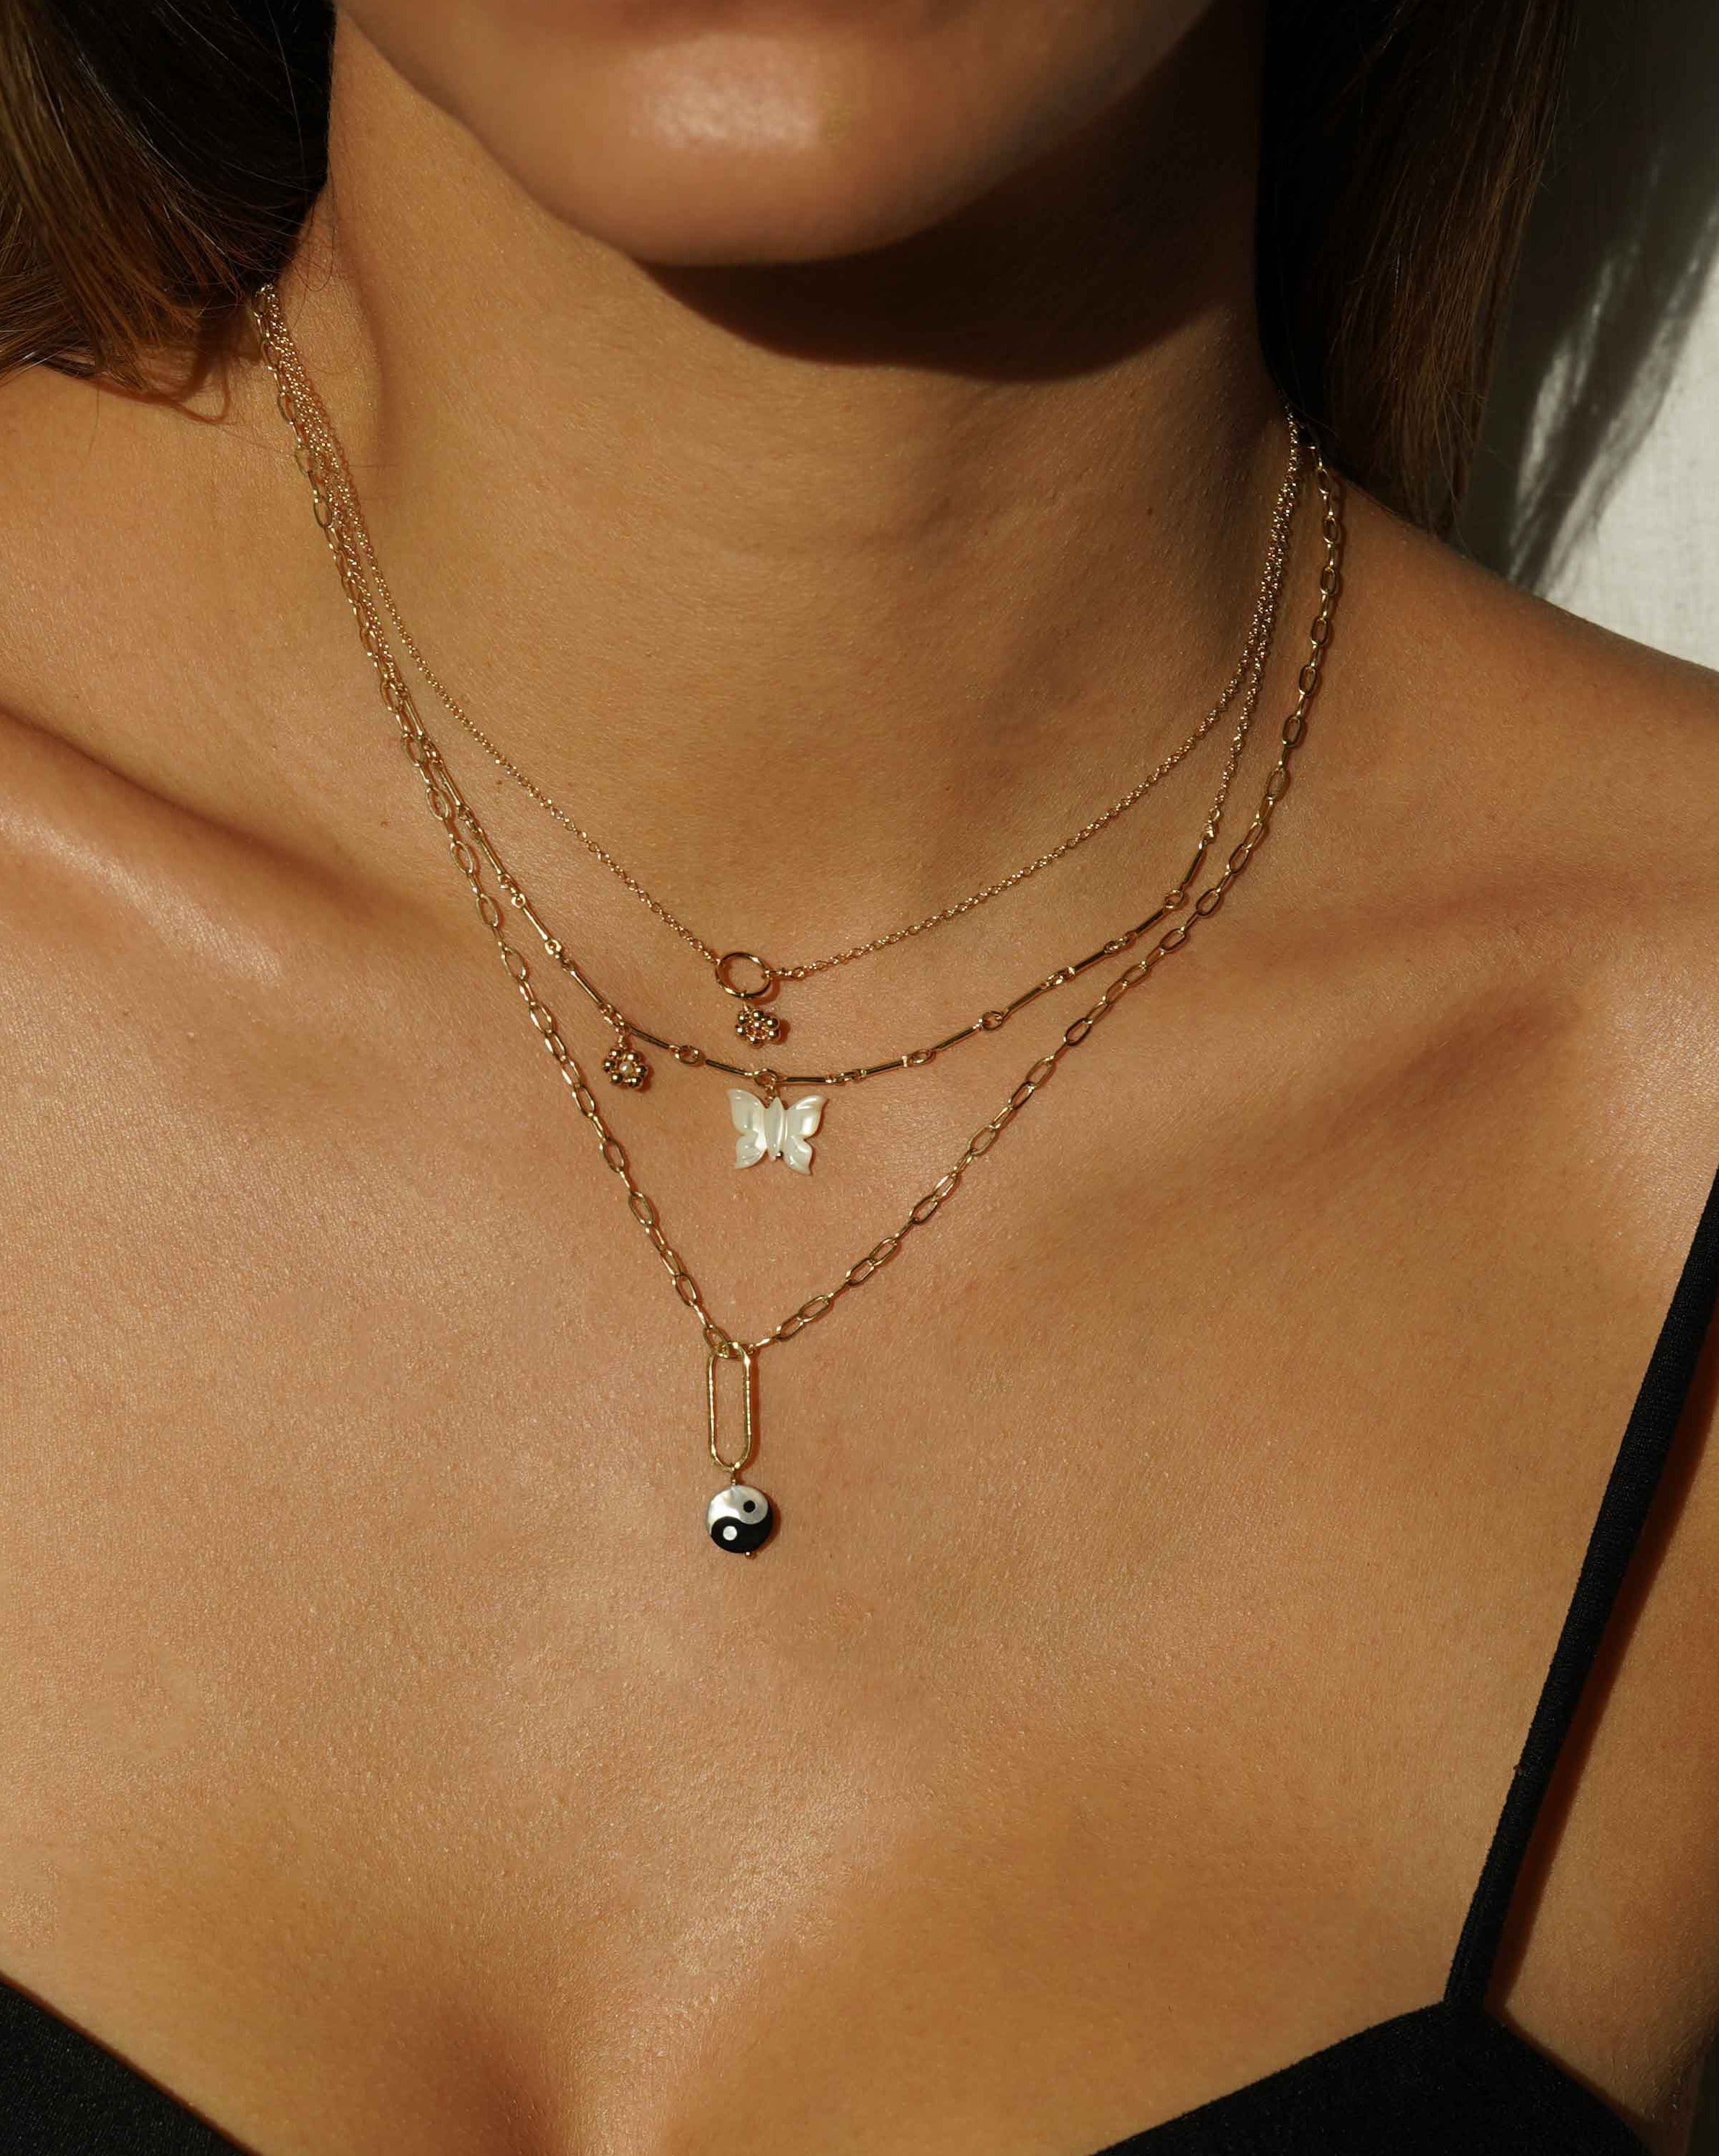 Yin Yang Necklace by KOZAKH. A 16 to 18 inch adjustable length, flat link cable chain necklace, crafted in 14K Gold Filled, featuring a hand carved Mother of pearl Yin Yang charm.